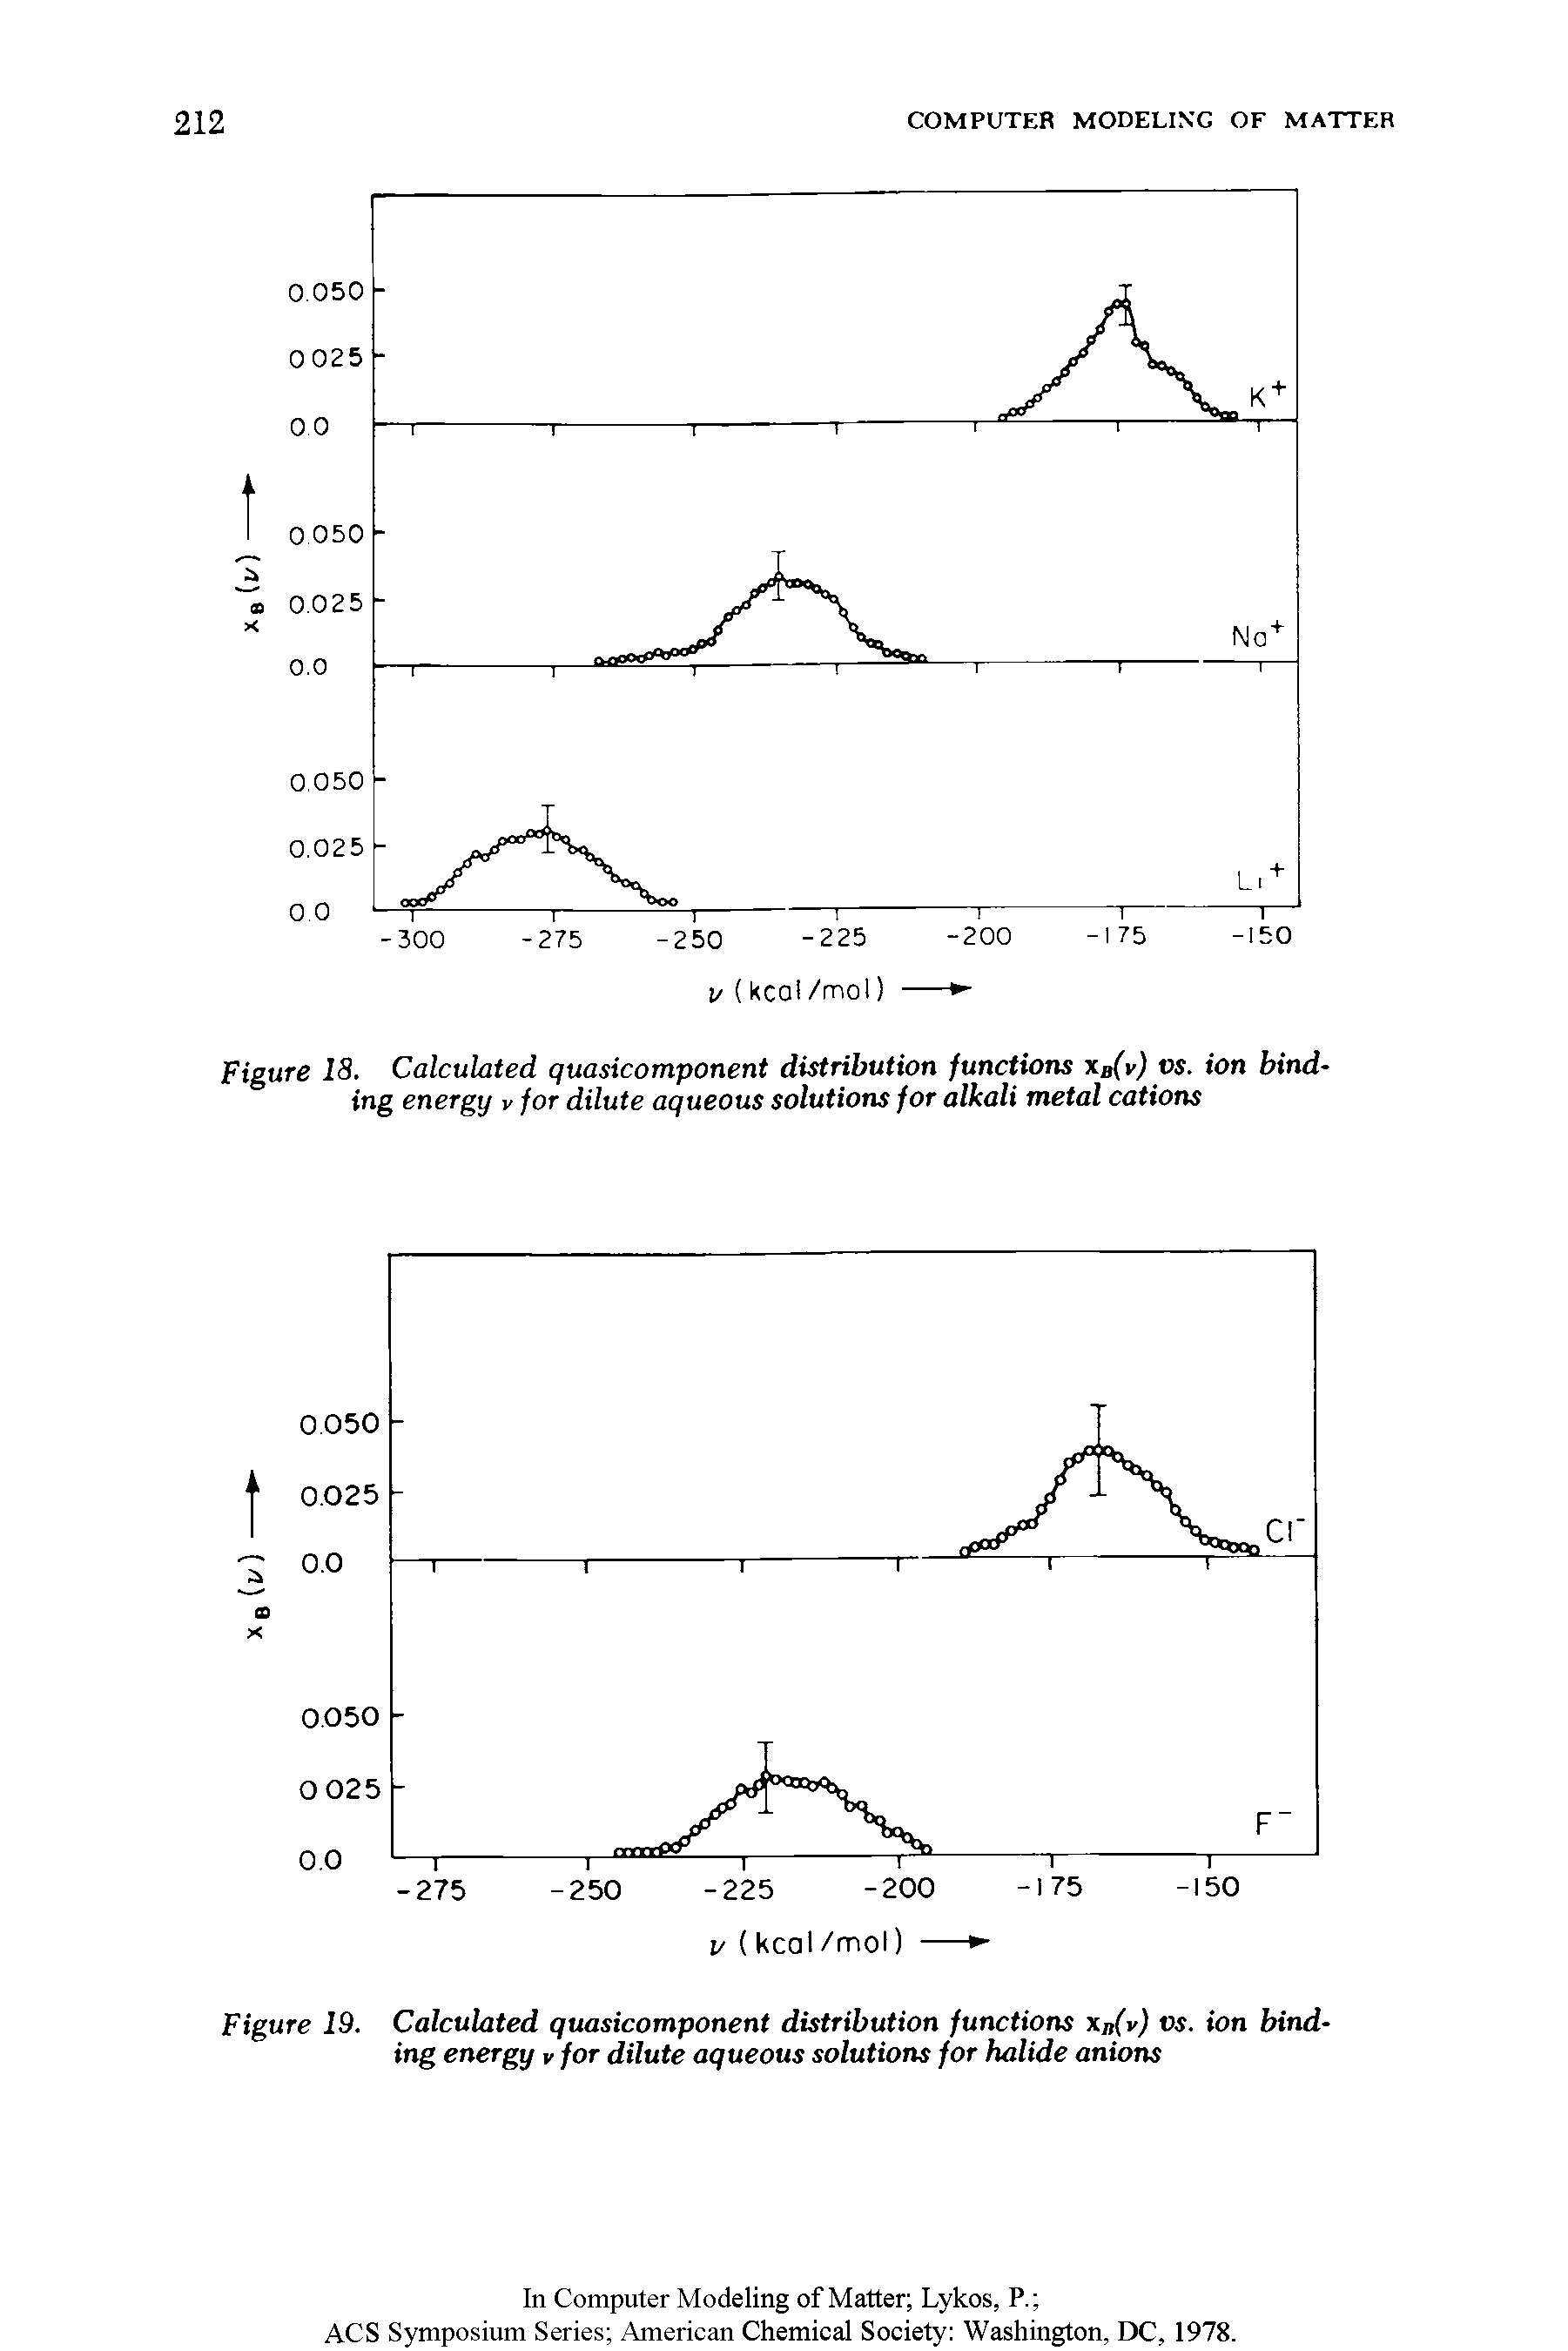 Figure 19. Calculated quasicomponent distribution functions Xn(v) vs. ion binding energy v for dilute aqueous solutions for halide anions...